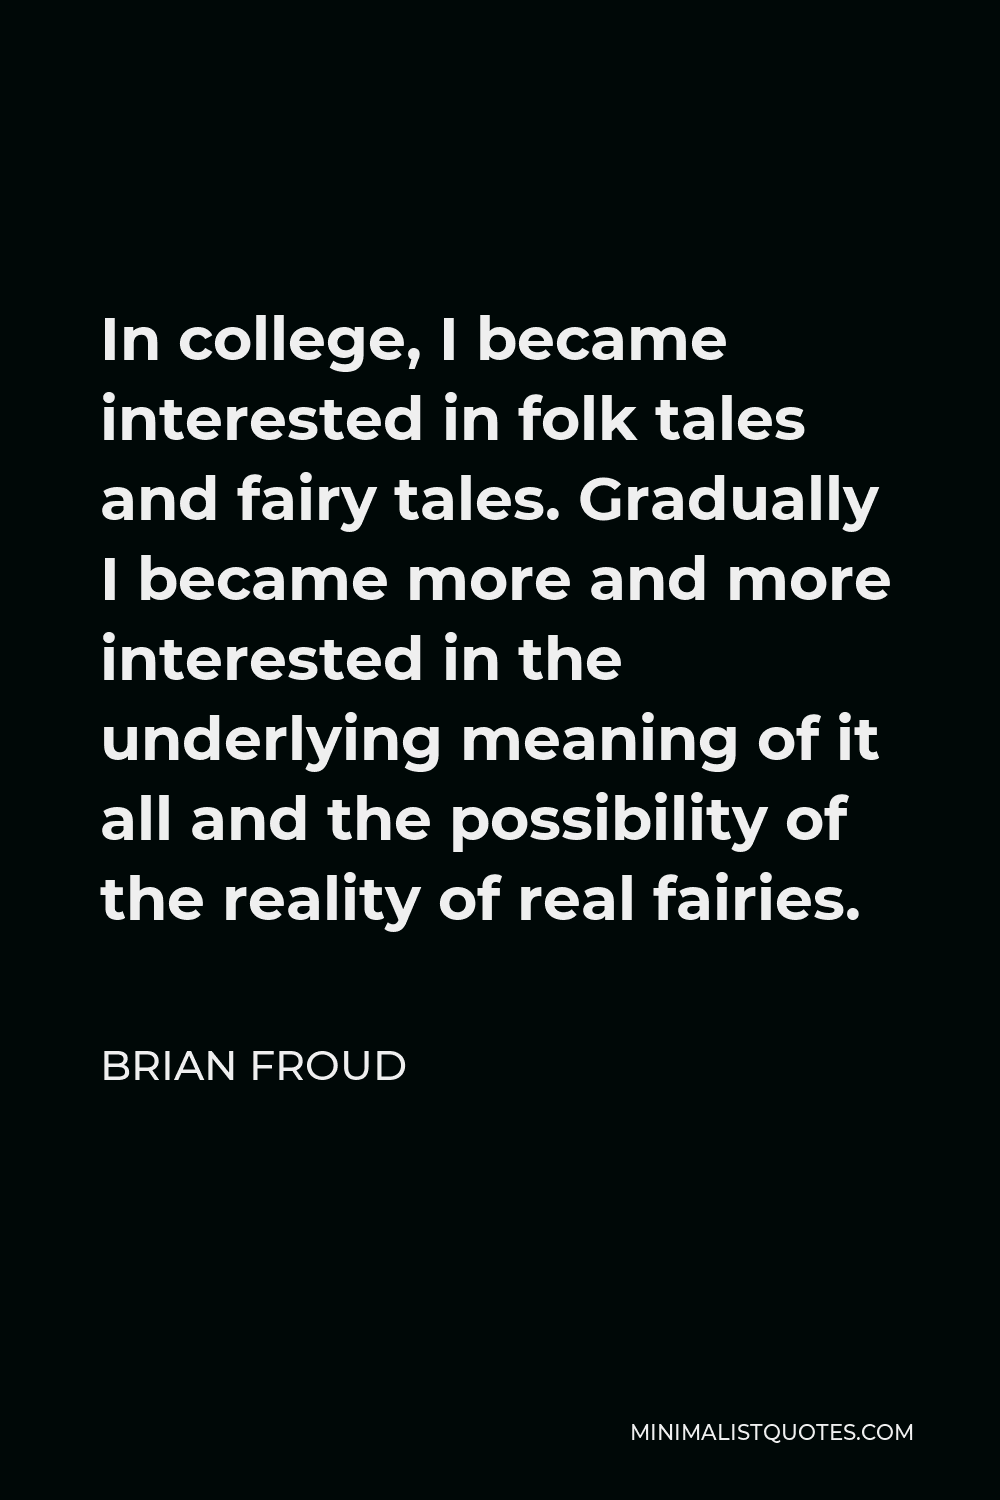 Brian Froud Quote - In college, I became interested in folk tales and fairy tales. Gradually I became more and more interested in the underlying meaning of it all and the possibility of the reality of real fairies.